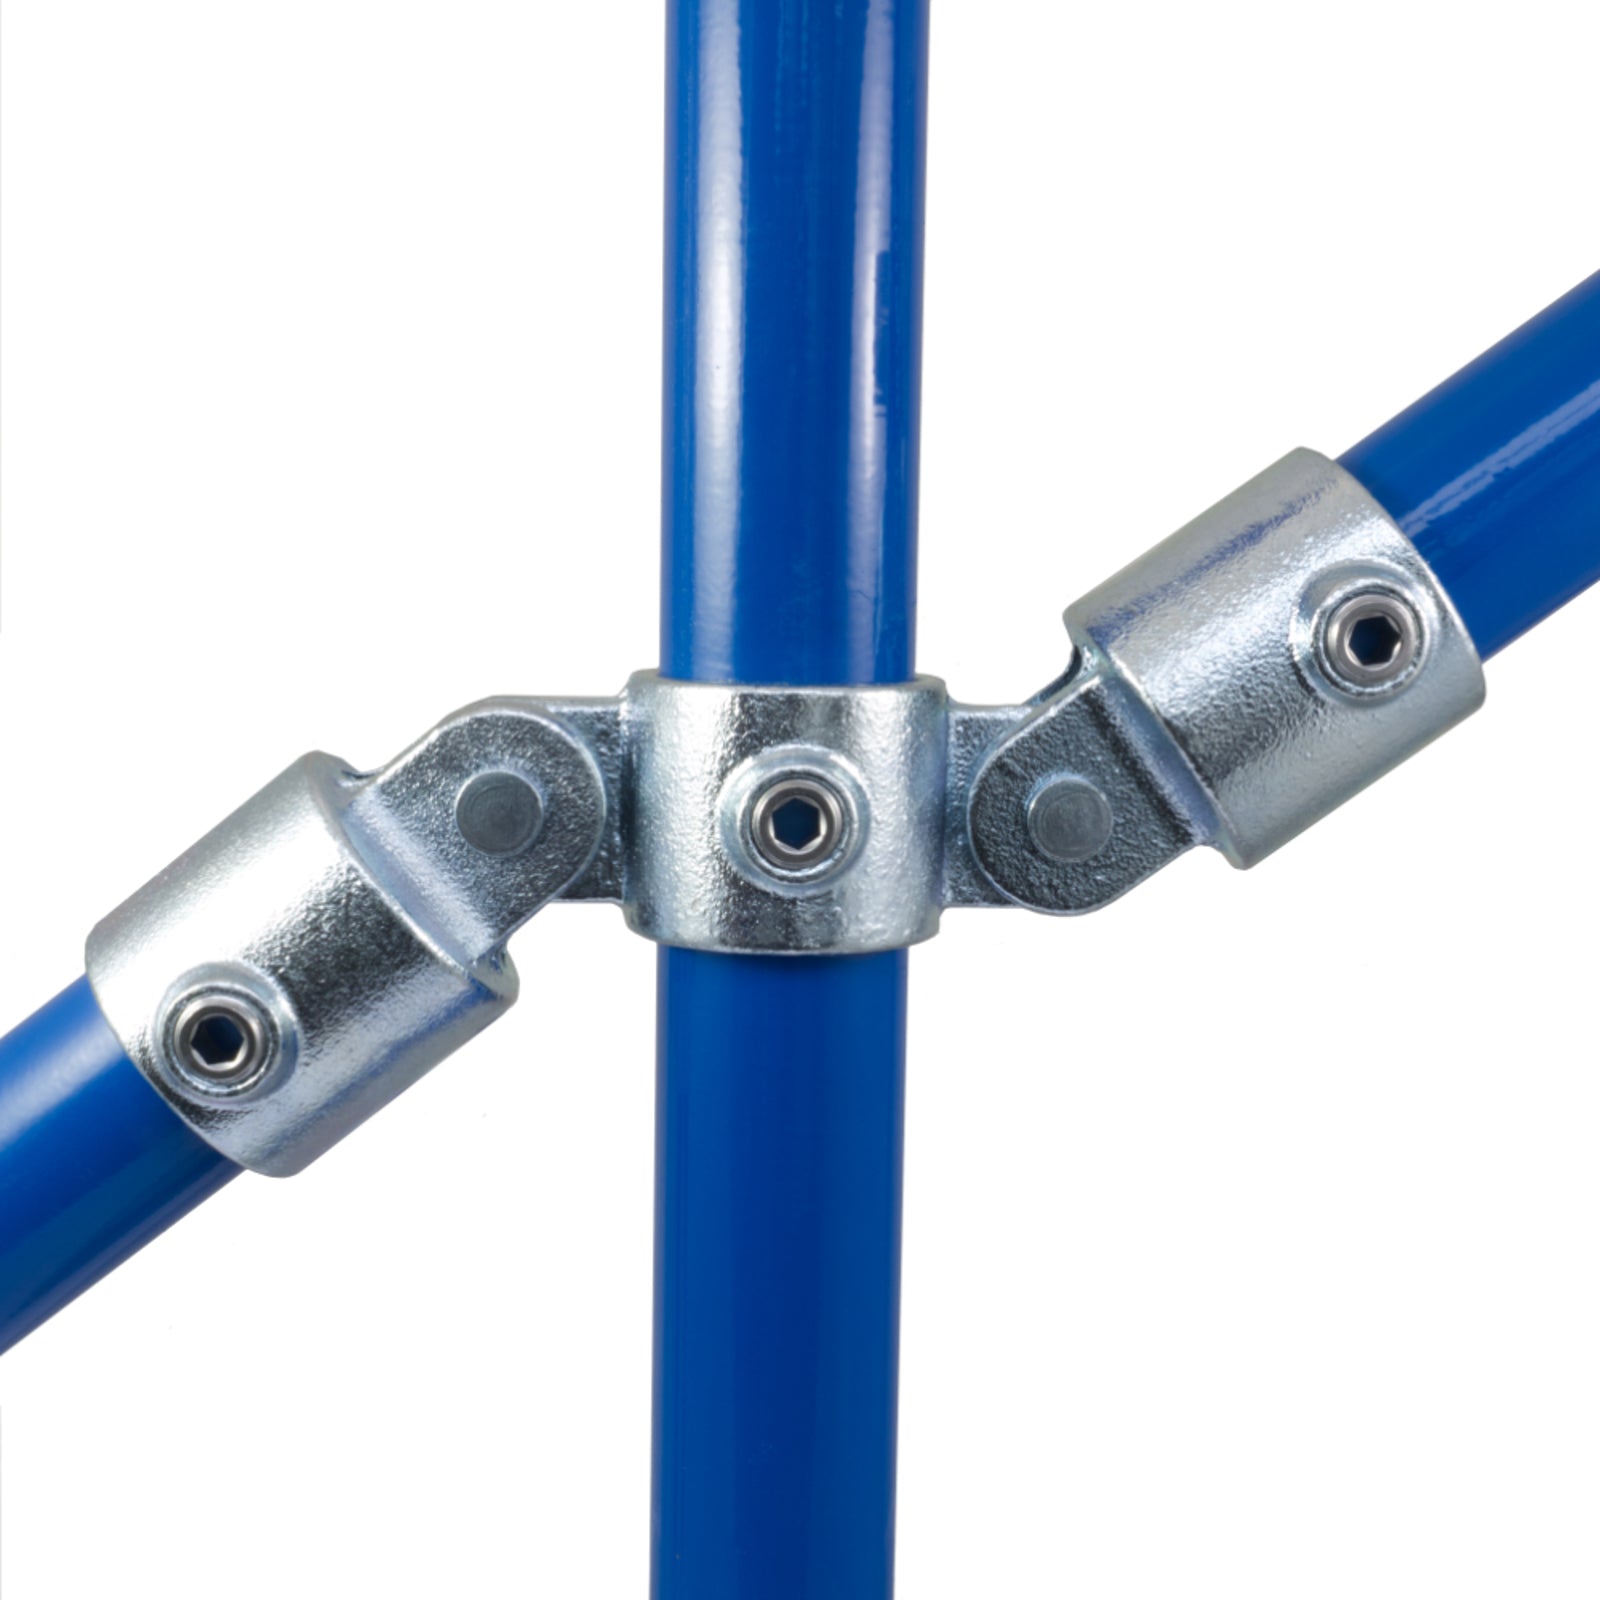 Double Swivel Combination by Interclamp, Code 167. Shop rail, pipe and fence fittings online chain.com.au. Australia wide shipping.